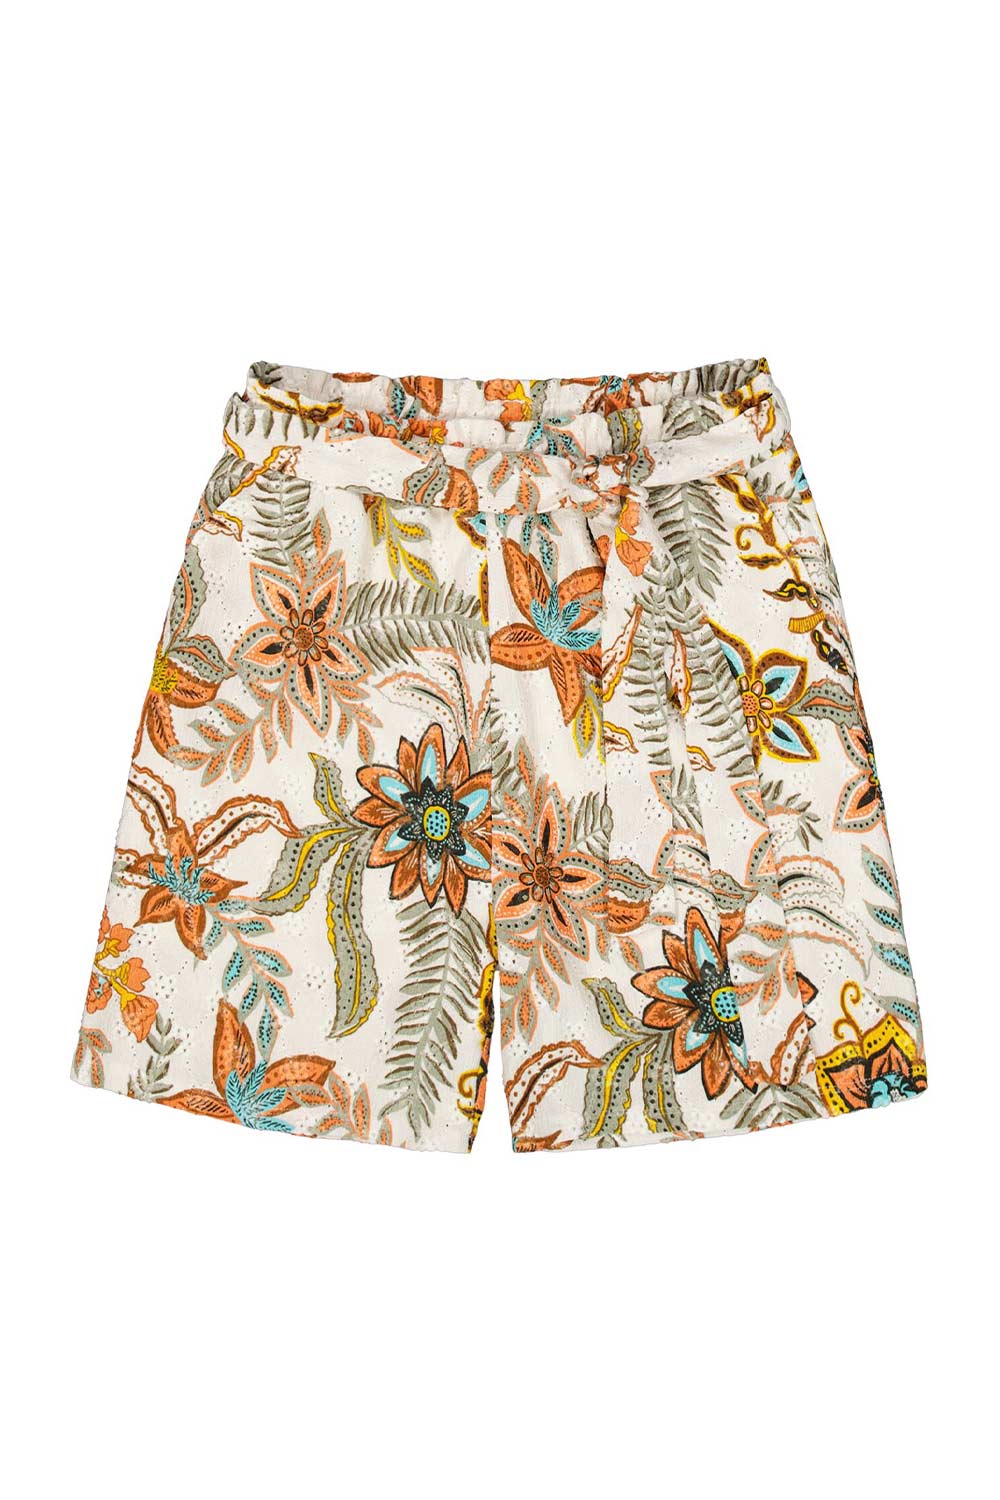 Garcia (Q40141) Women's High Rise Paper Bag Shorts with Tie Belt and Side Pockets in Retro Orange Floral Print